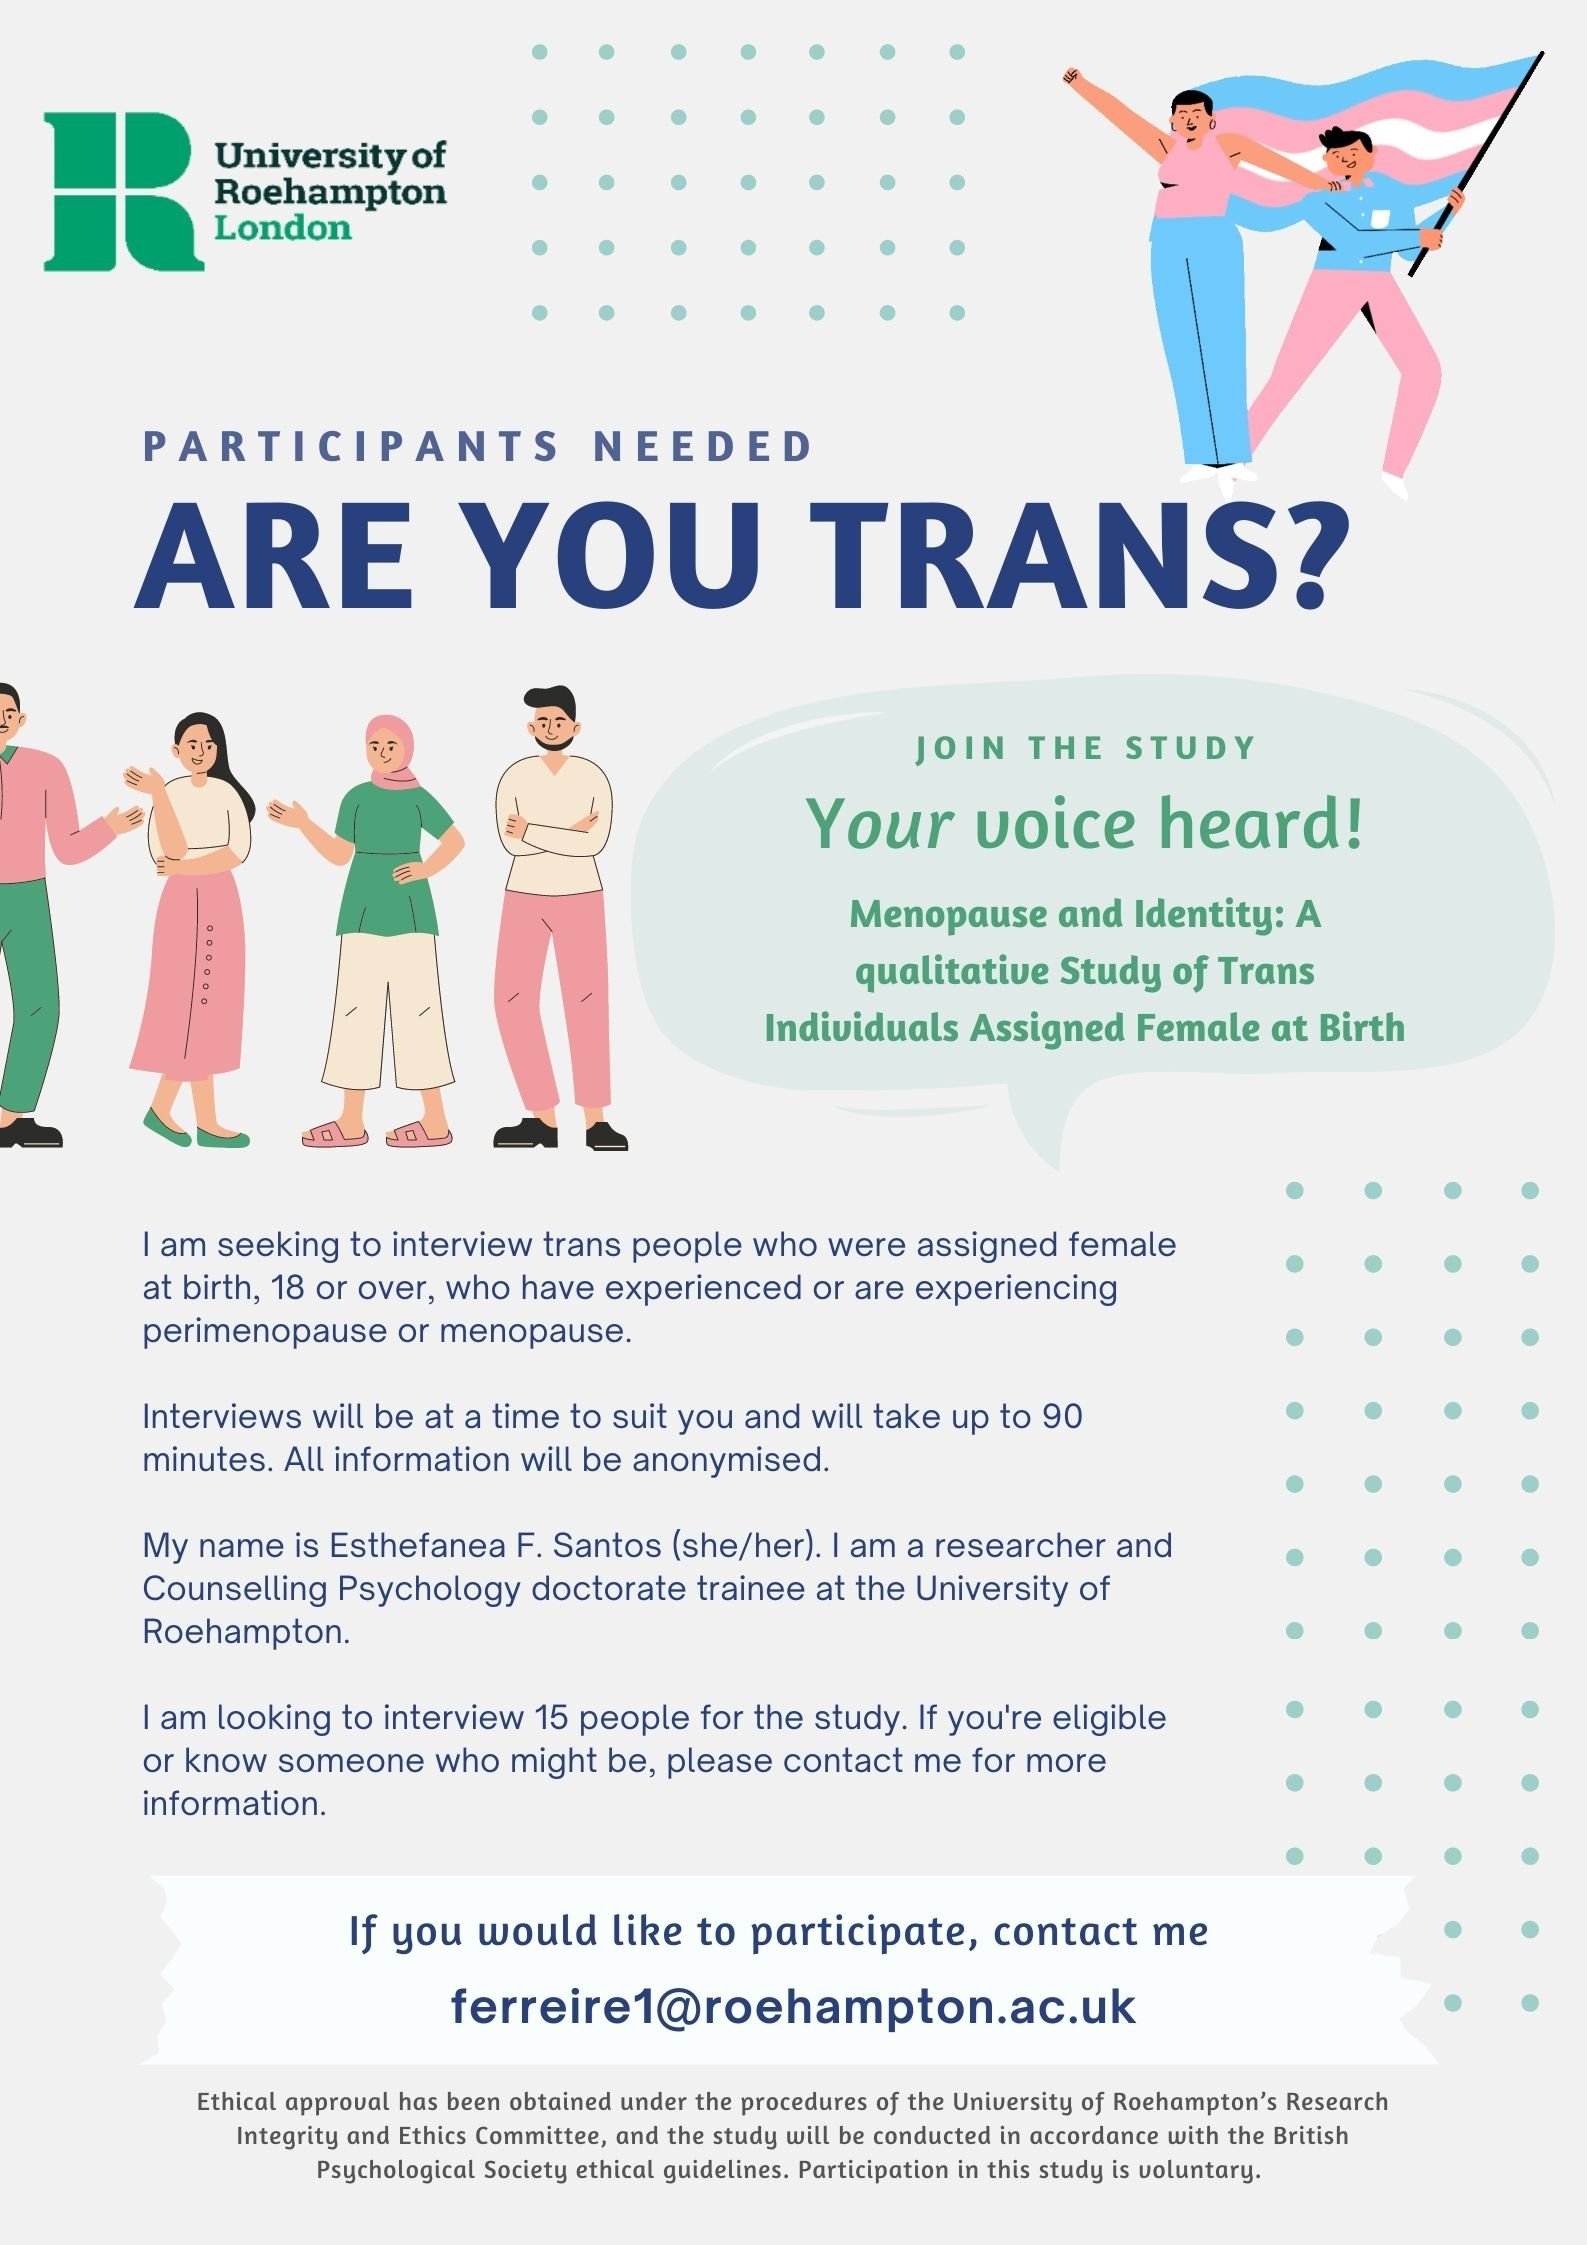 Recruitment poster for research into menopause of Trans people assigned female at birth.